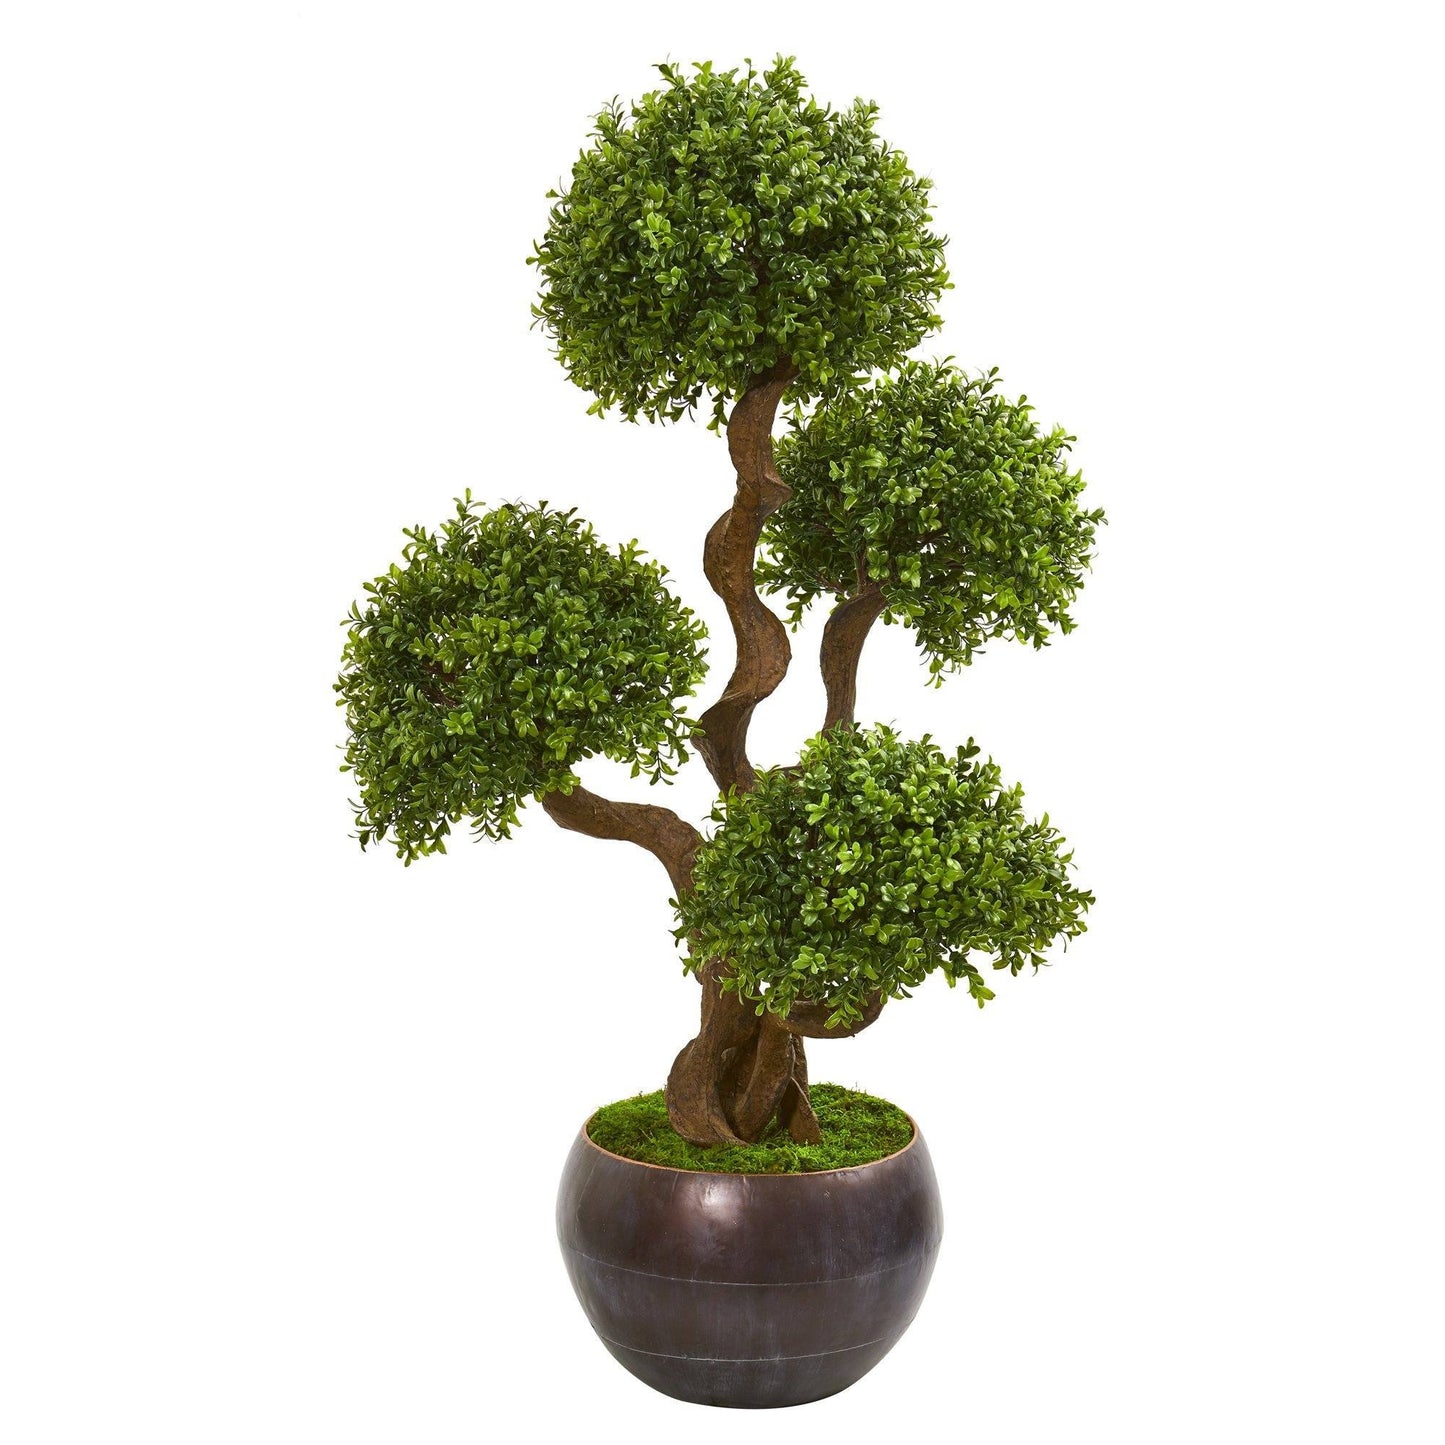 44” Four Ball Boxwood Artificial Topiary Tree in Planter by Nearly Natural